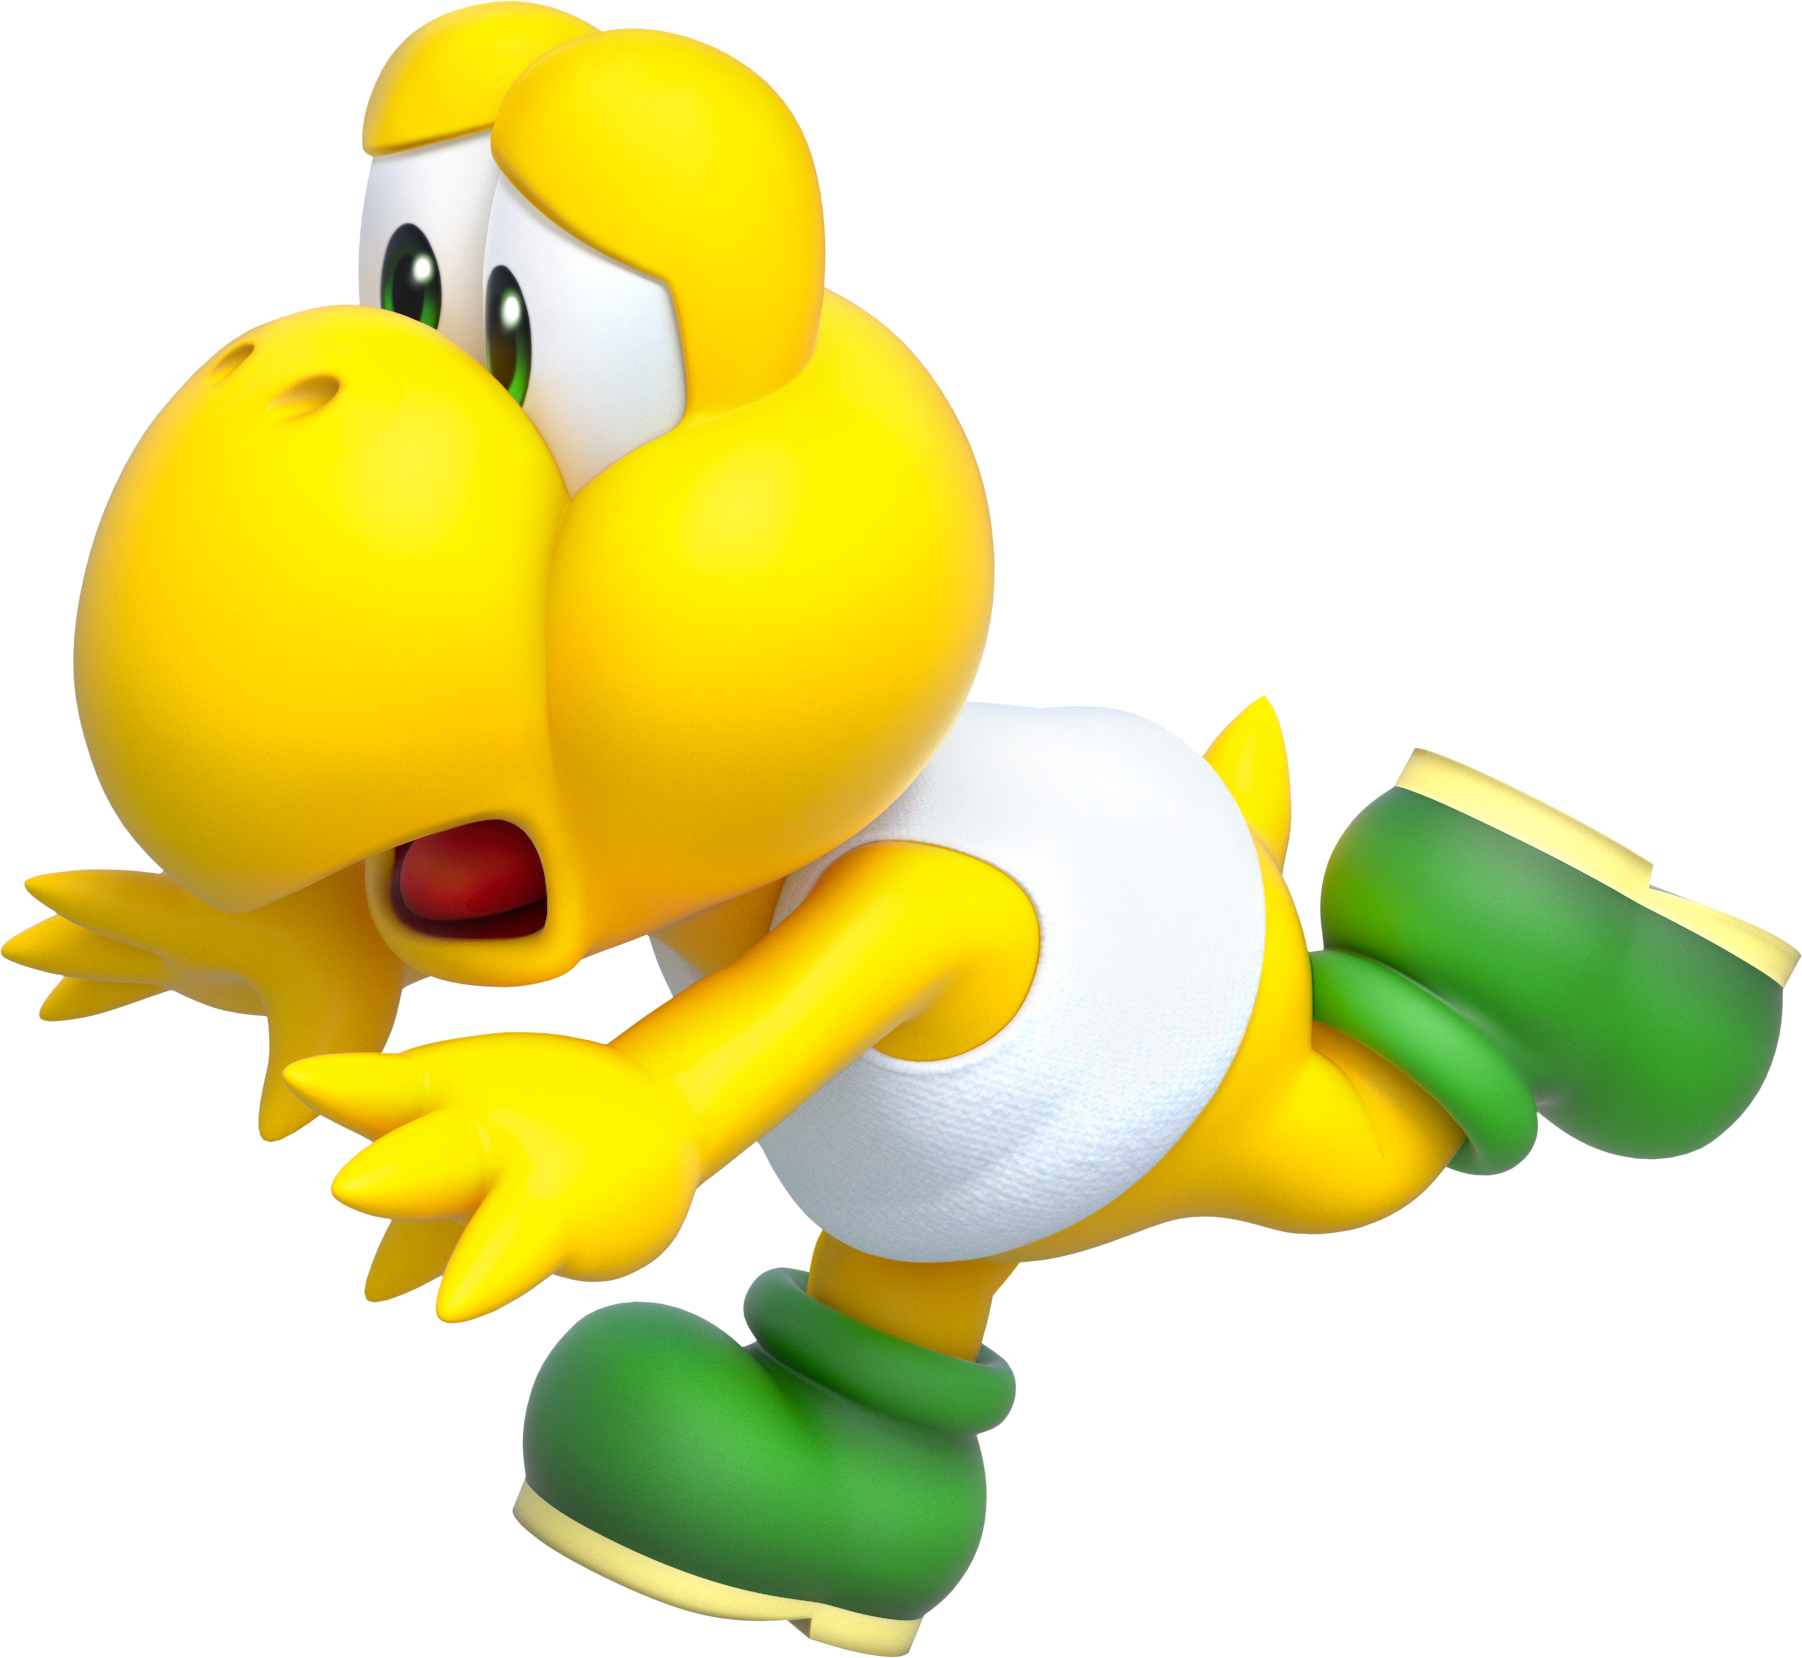 Galerry Fire Flower Mario Coloring Pages - Koopa Troopa Without Shell.